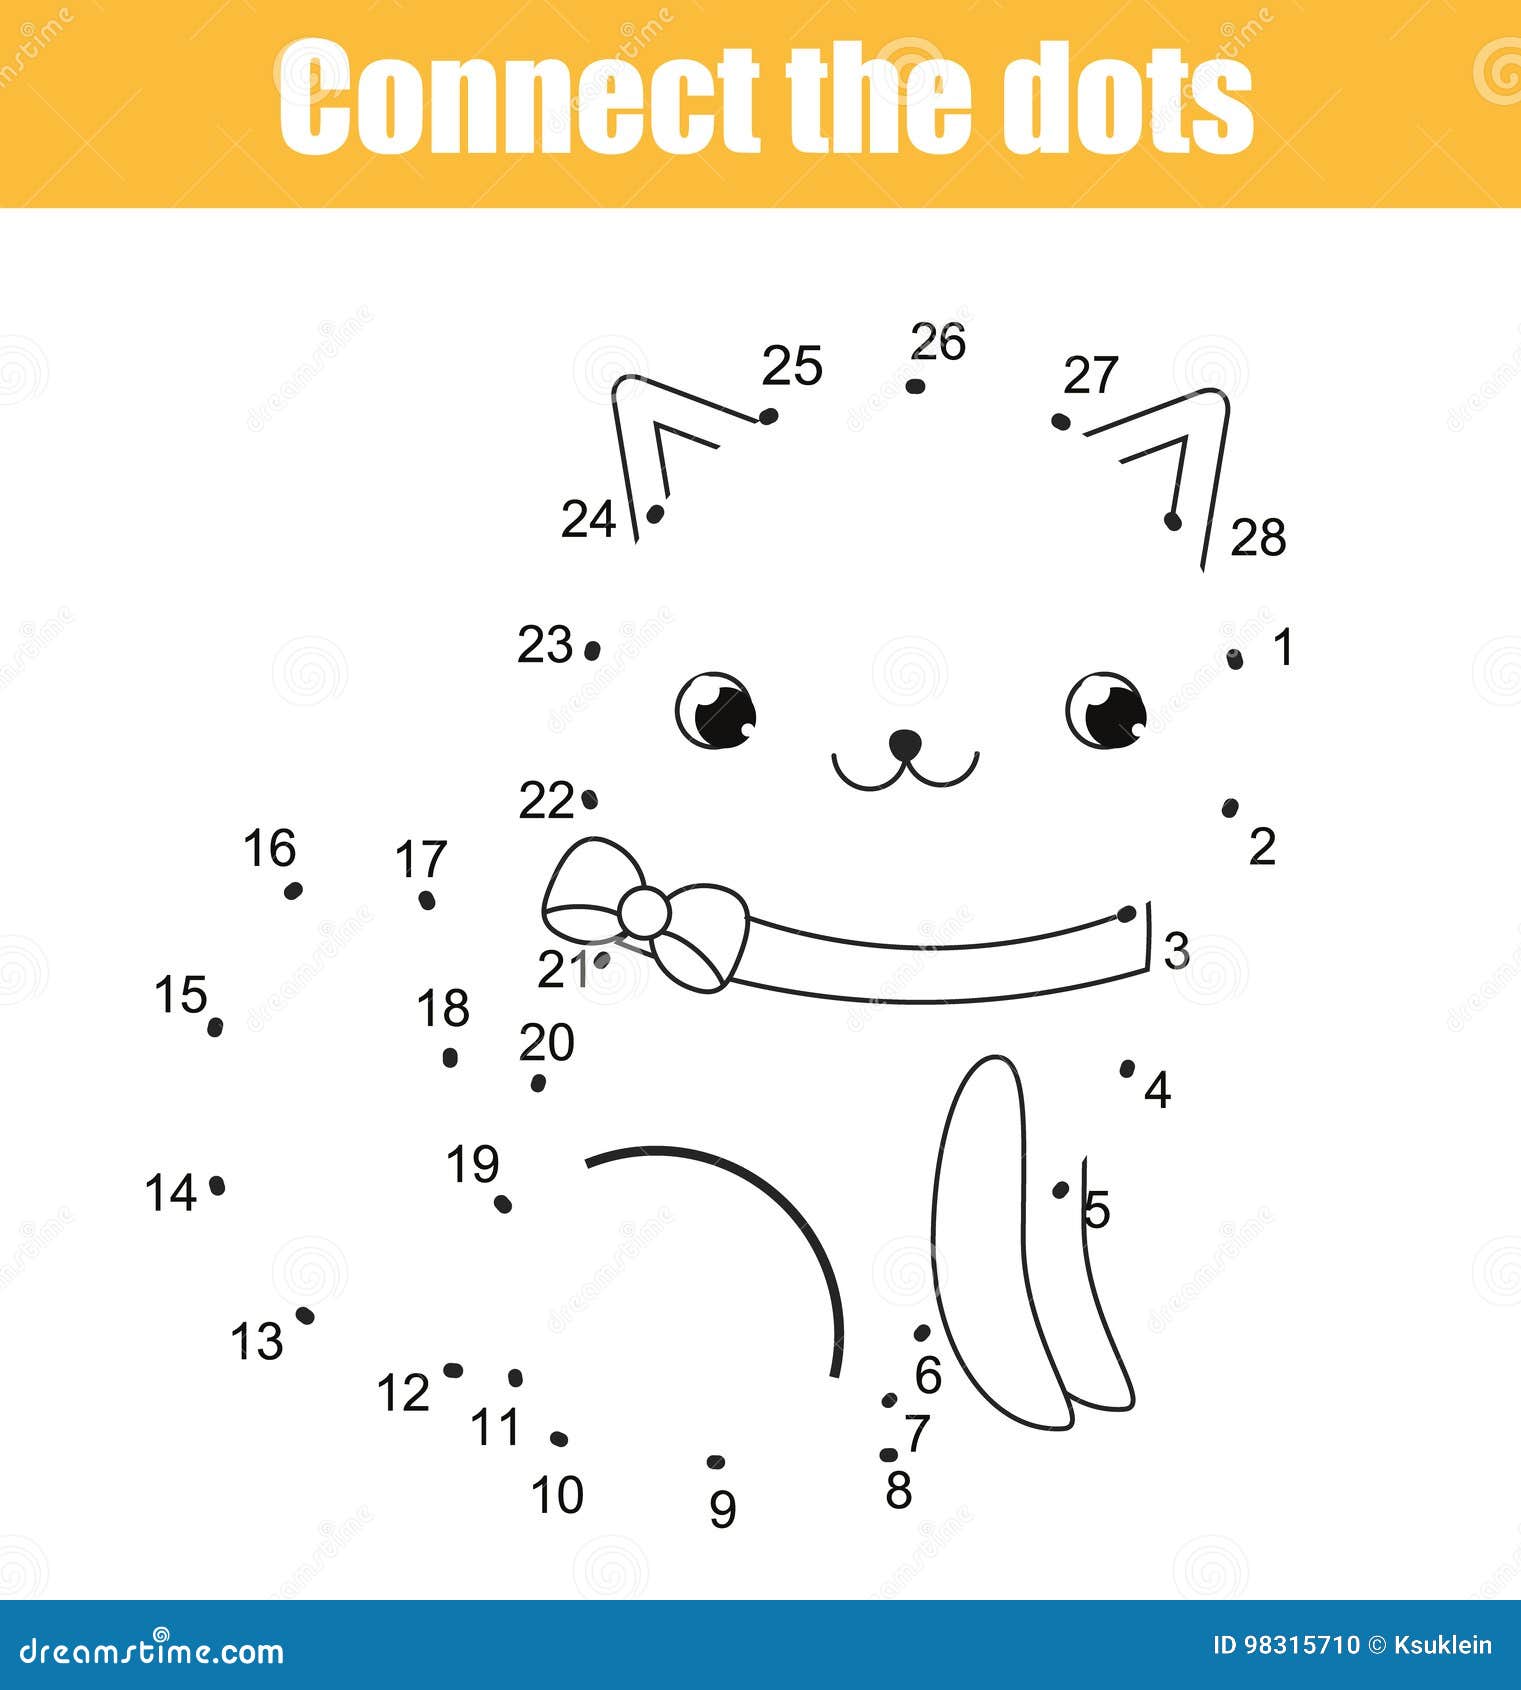 connect-the-dots-by-numbers-children-educational-game-printable-worksheet-activity-animals